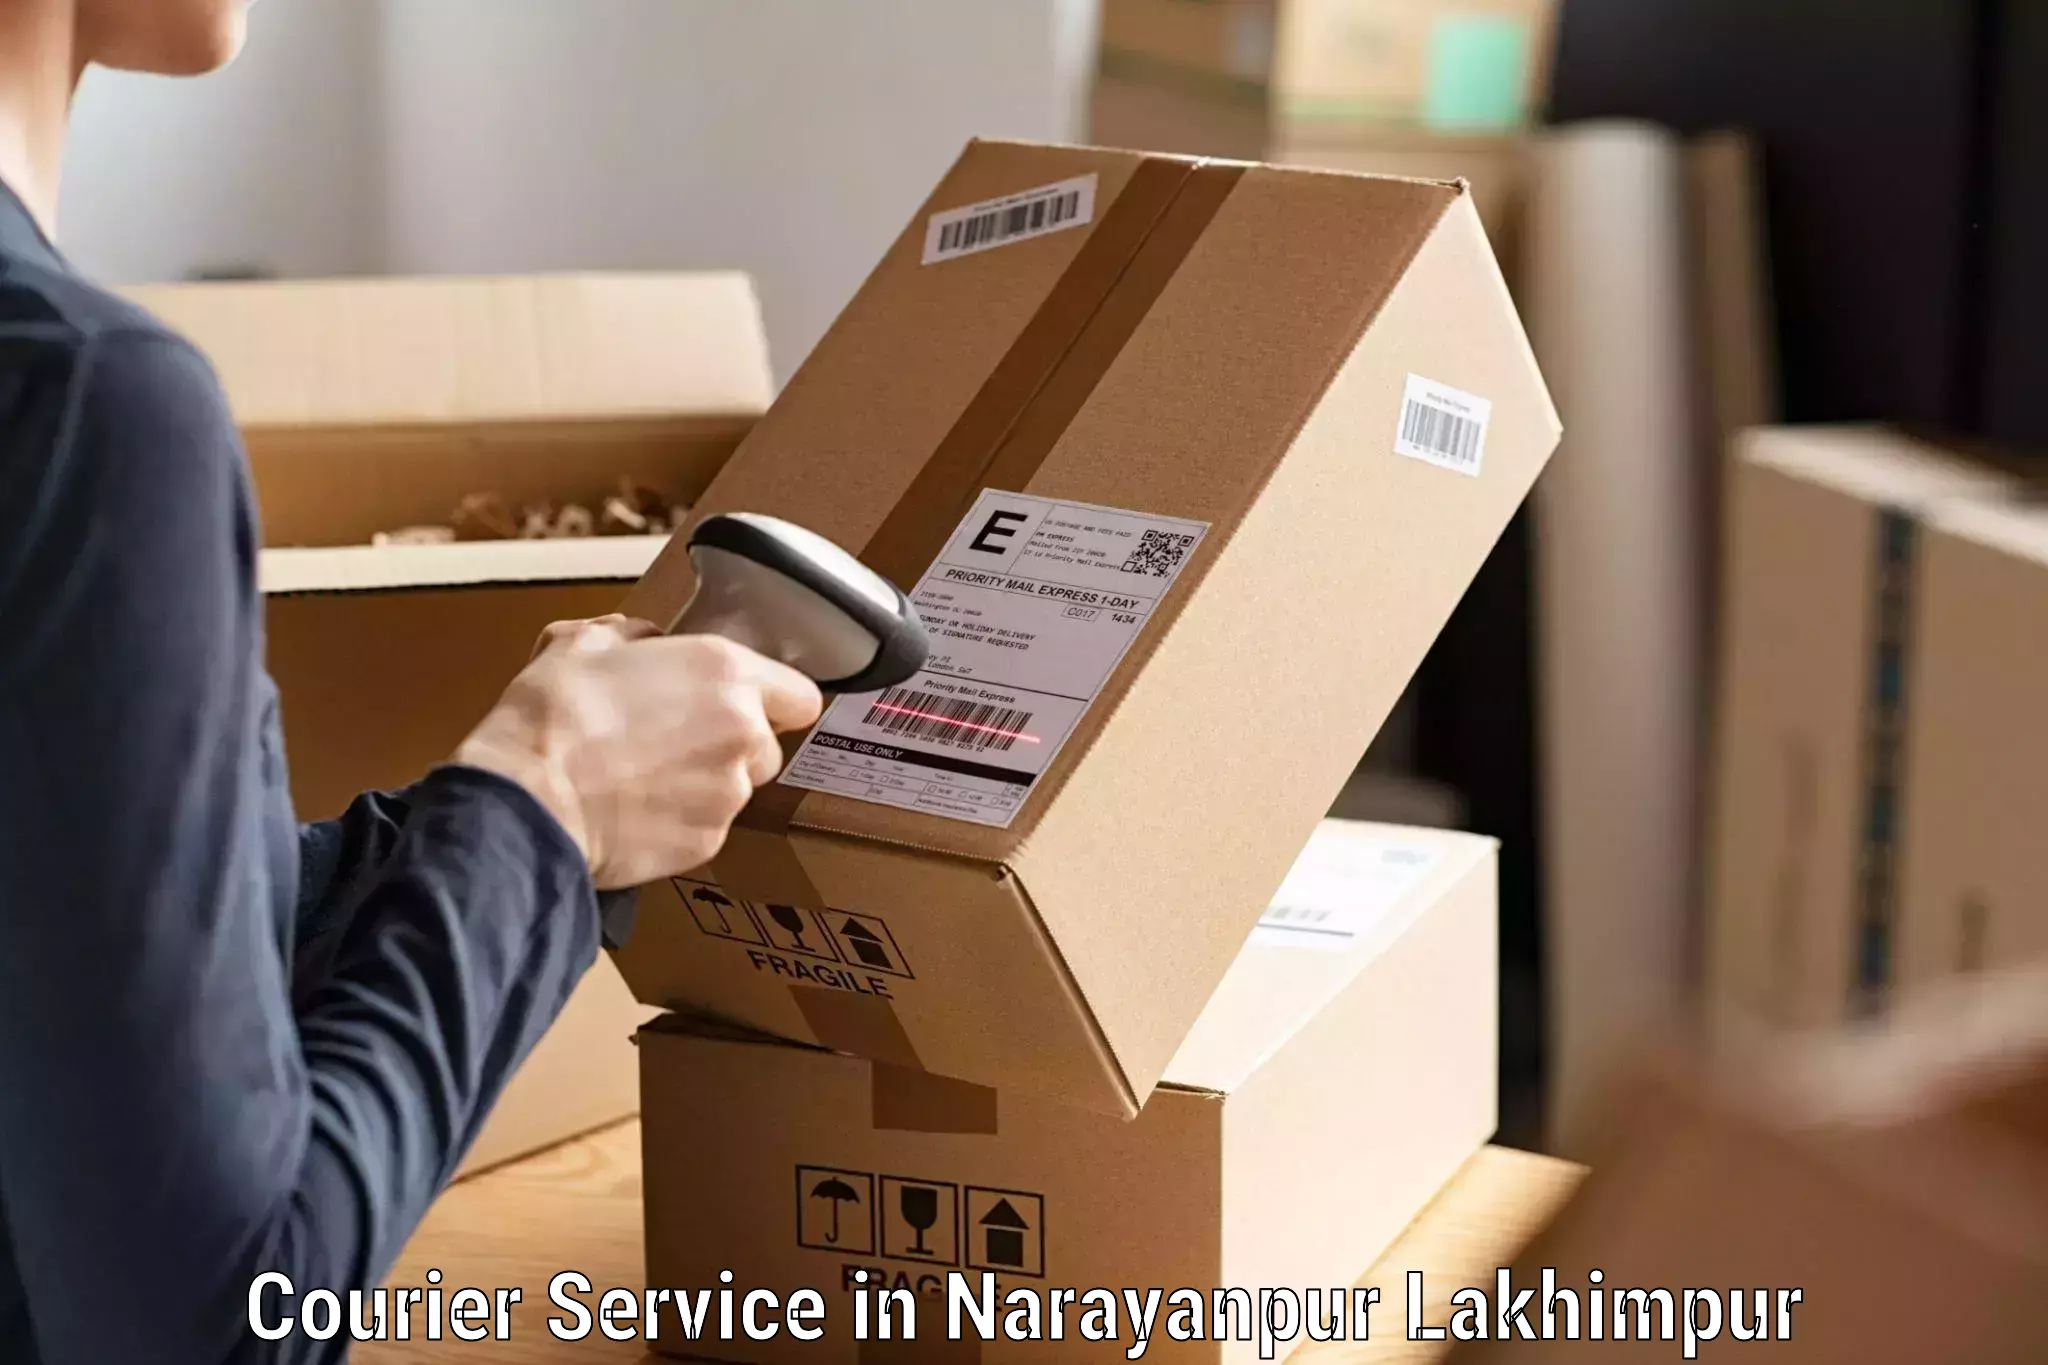 Dynamic courier operations in Narayanpur Lakhimpur